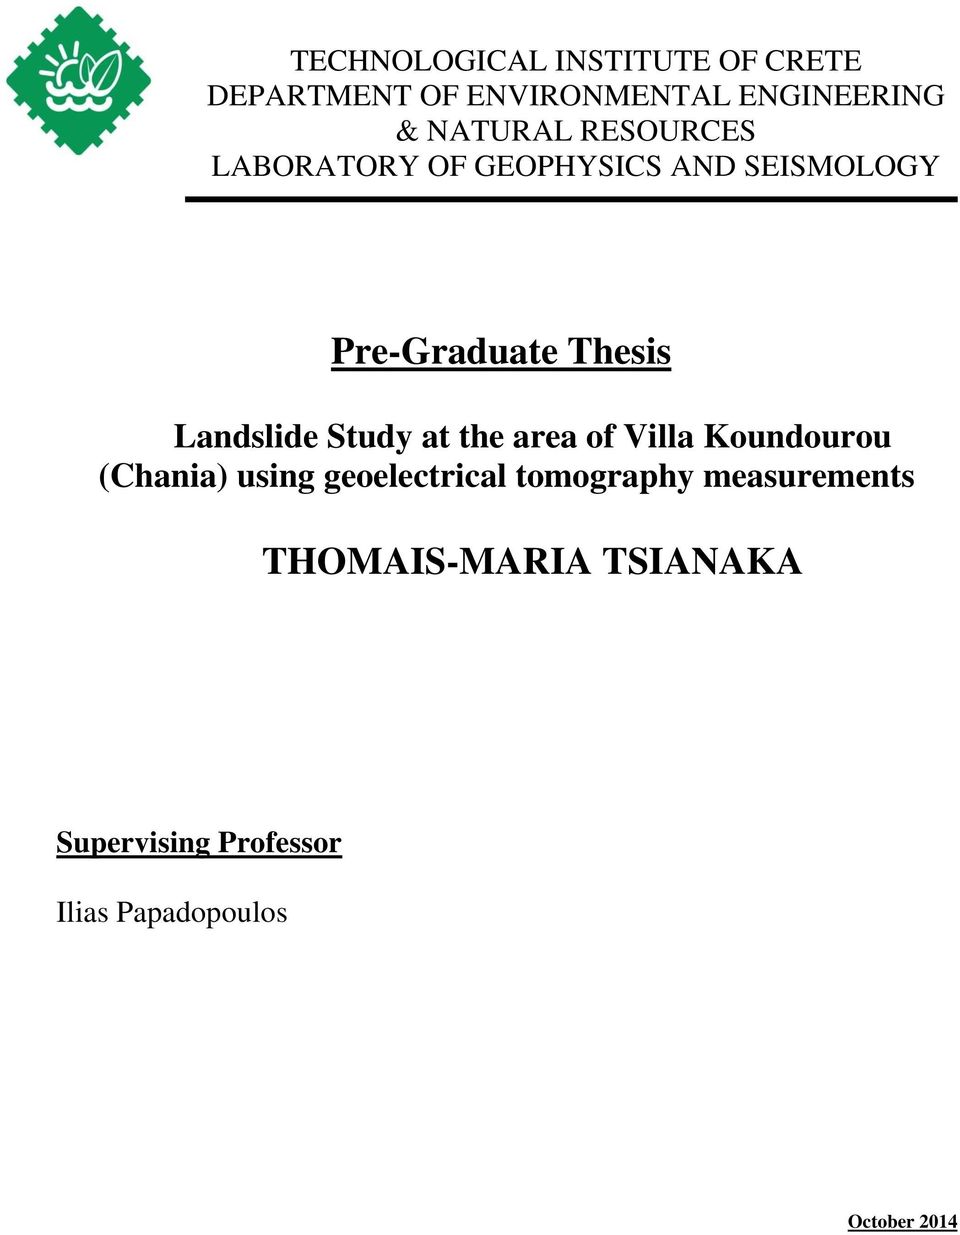 Study at the area of Villa Koundourou (Chania) using geoelectrical tomography